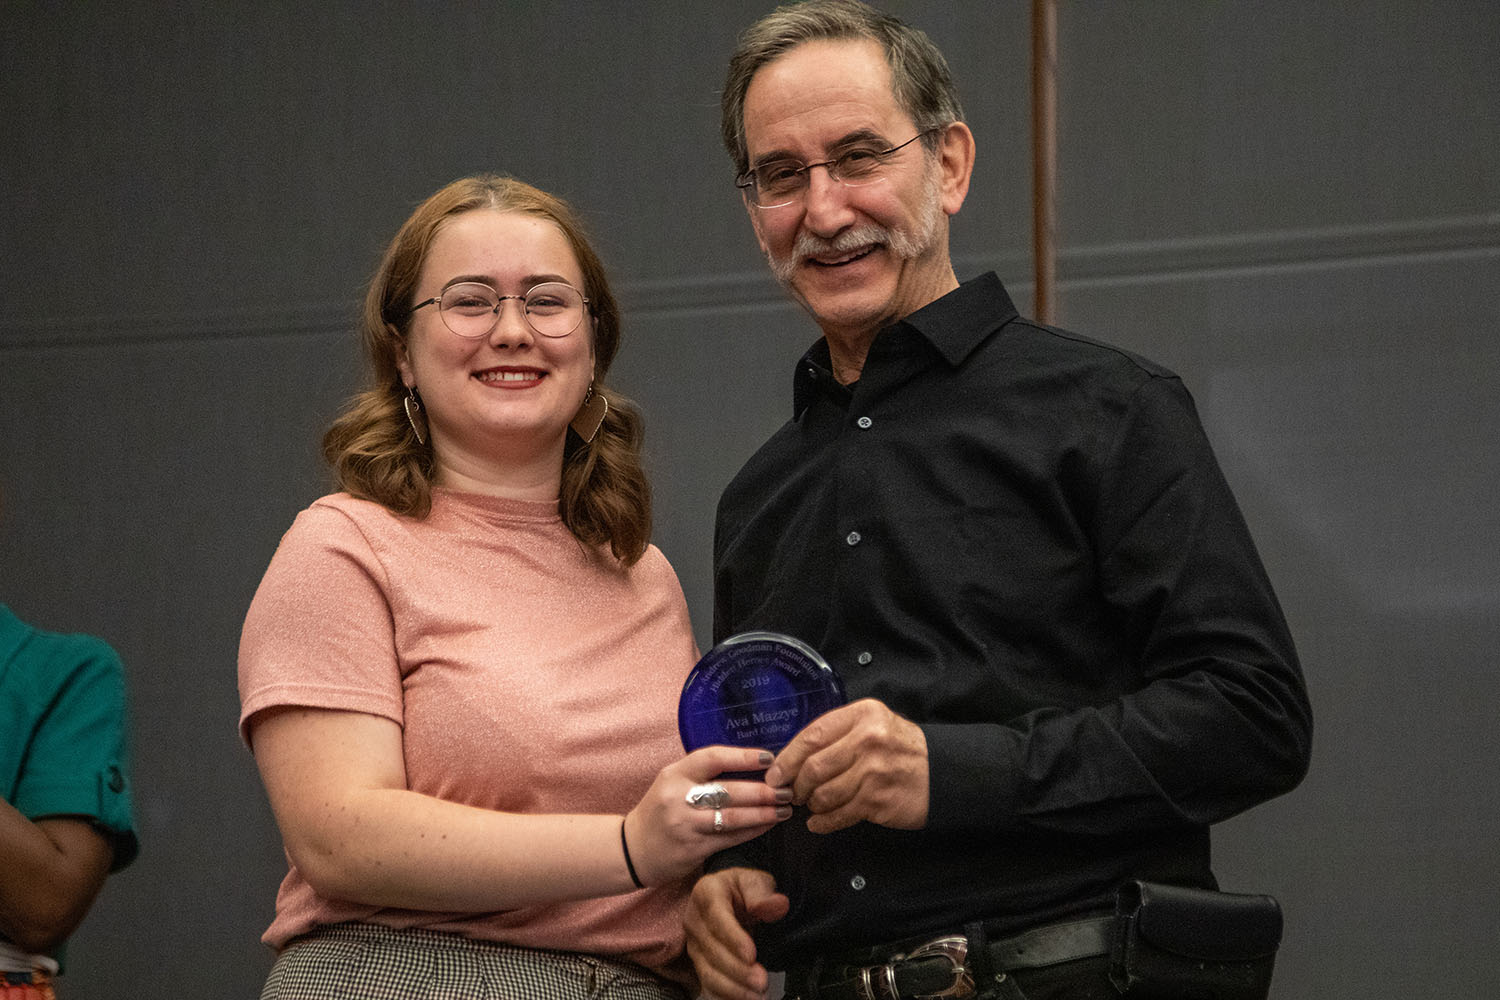 Bard College Student Ava Mazzye &#39;20 Receives the Andrew Goodman Foundation Hidden Heroes Award for Commitment to Protecting and Expanding Democracy